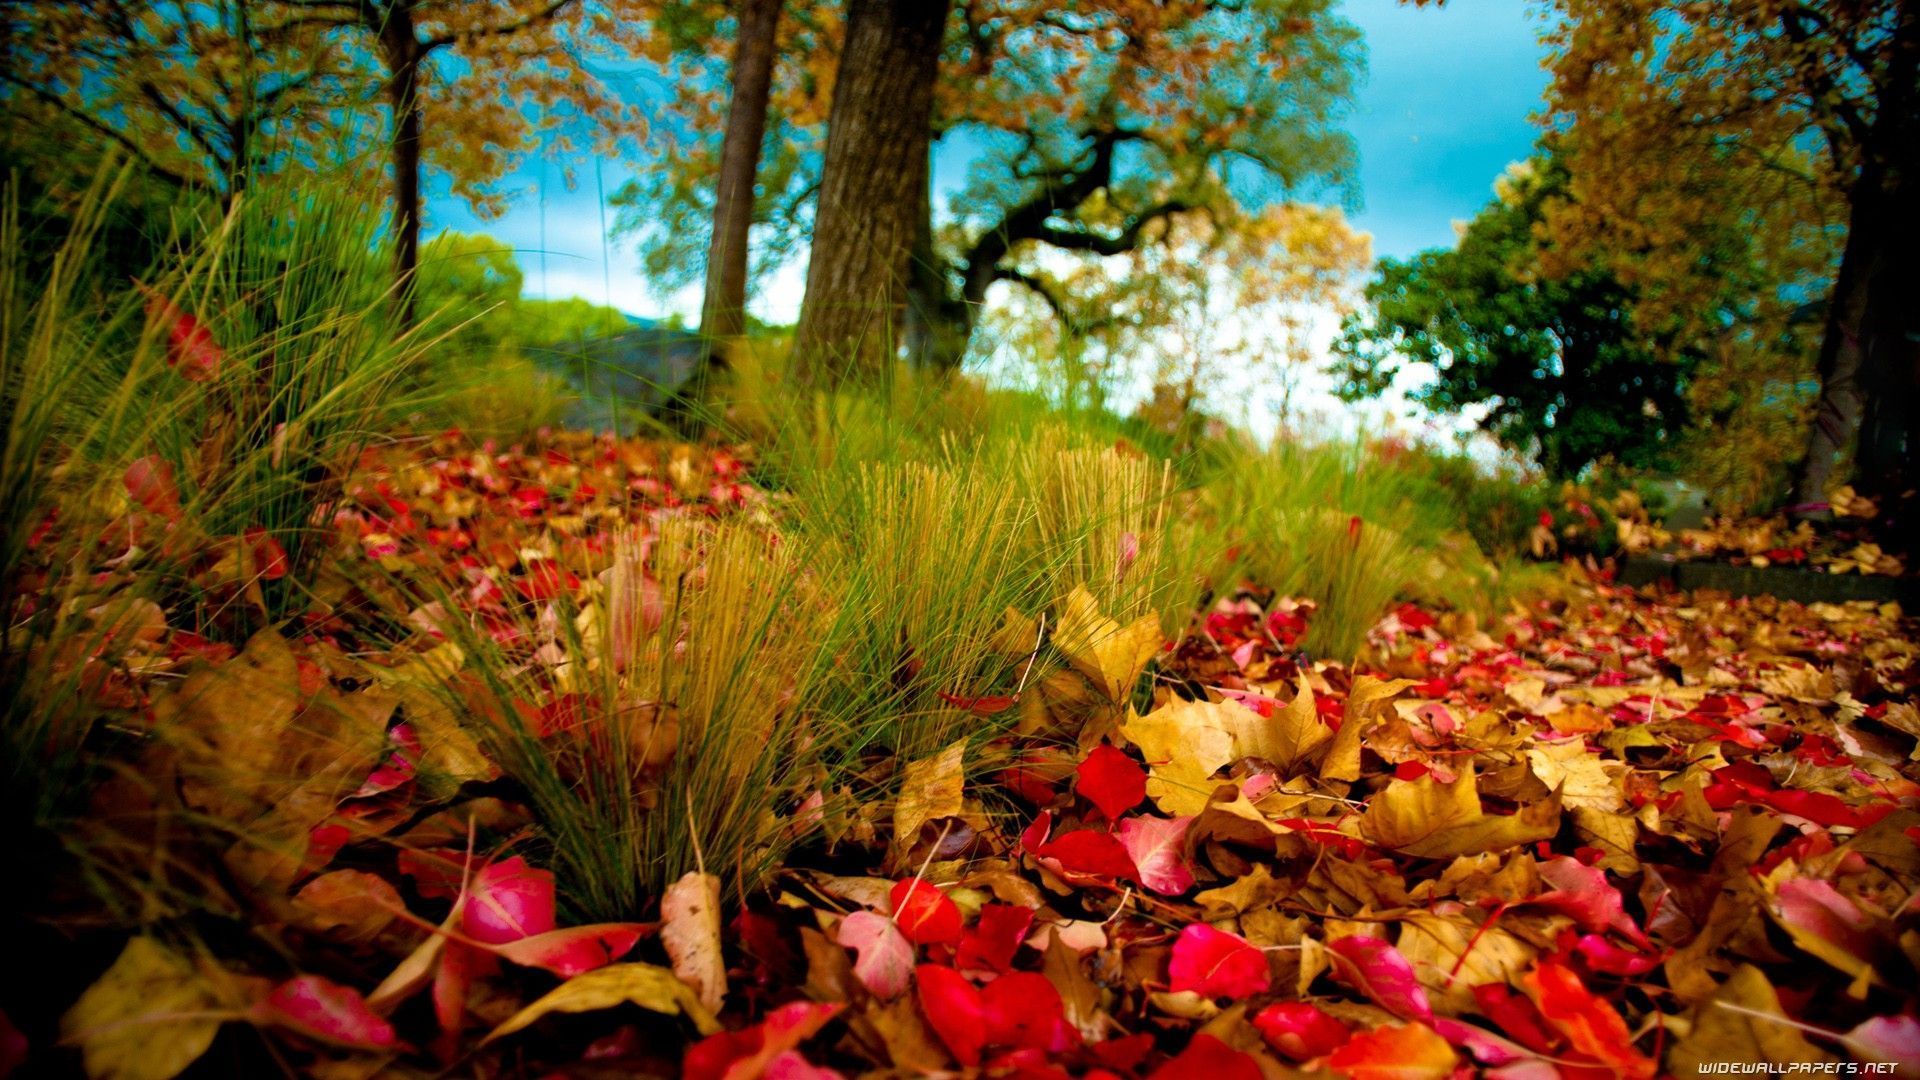 Nature Wallpapers - HD Desktop Backgrounds - Page 2